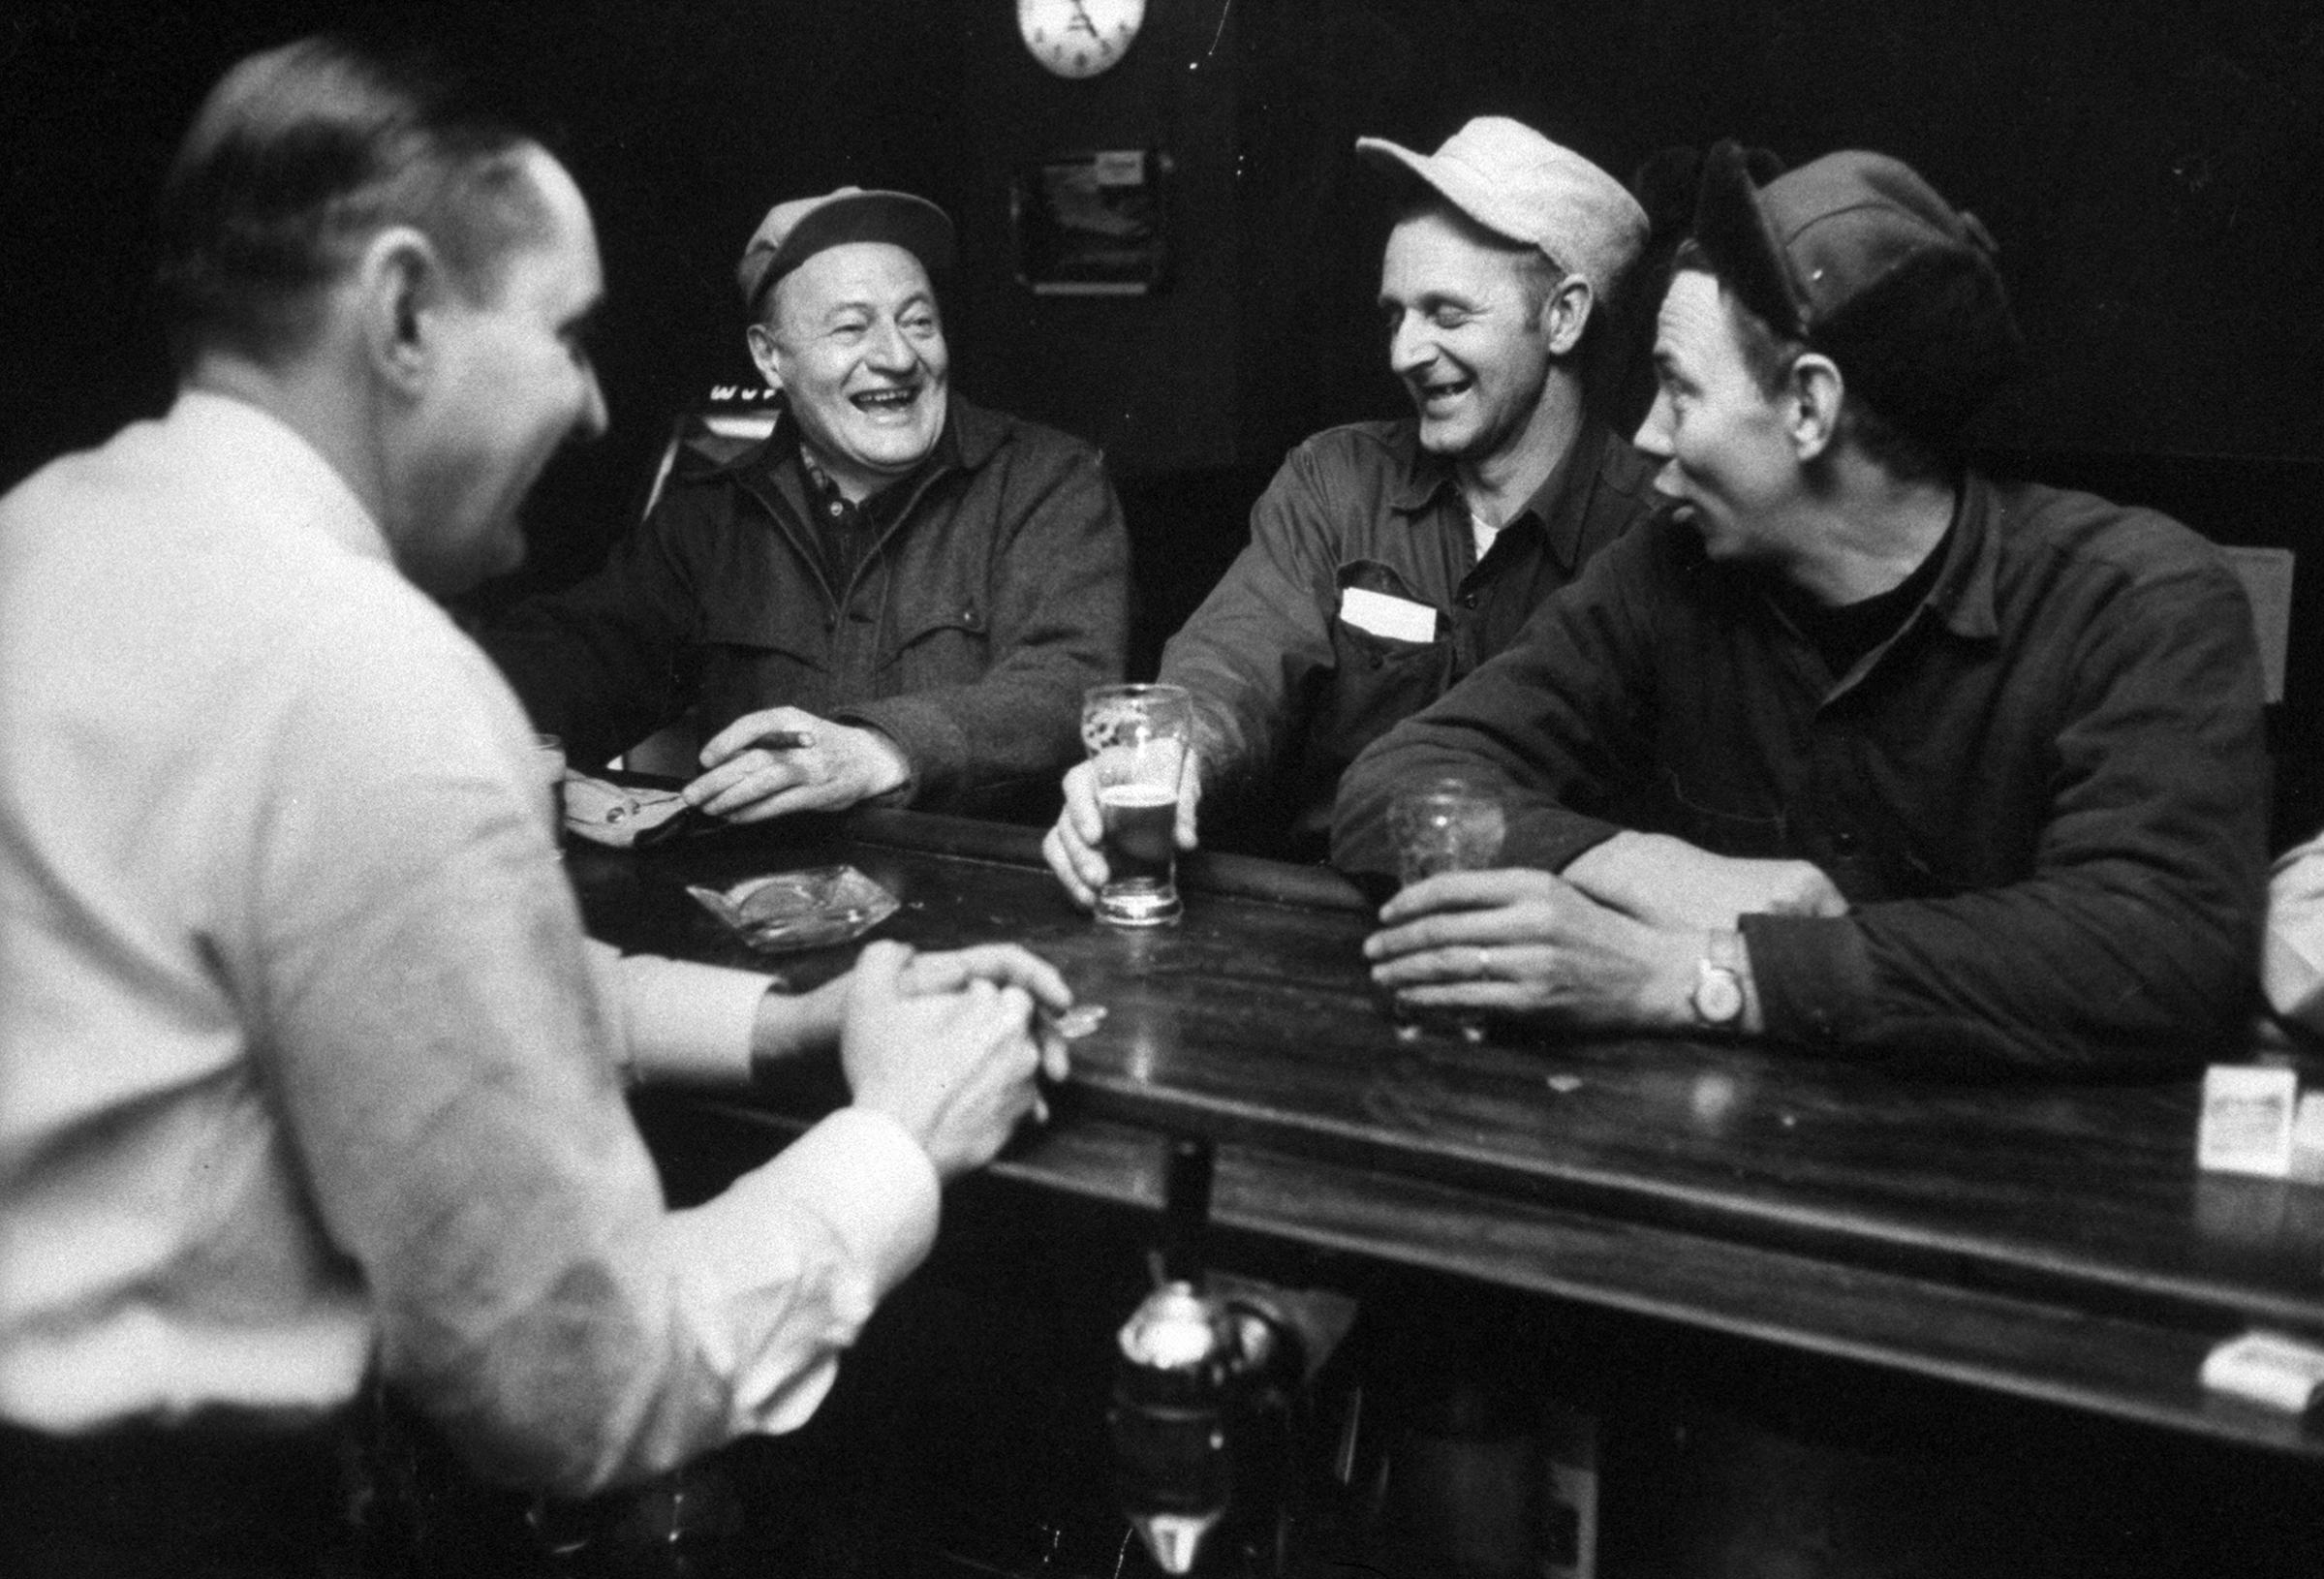 Judge John D. Voelker relaxing with friends in a tavern, 1958.